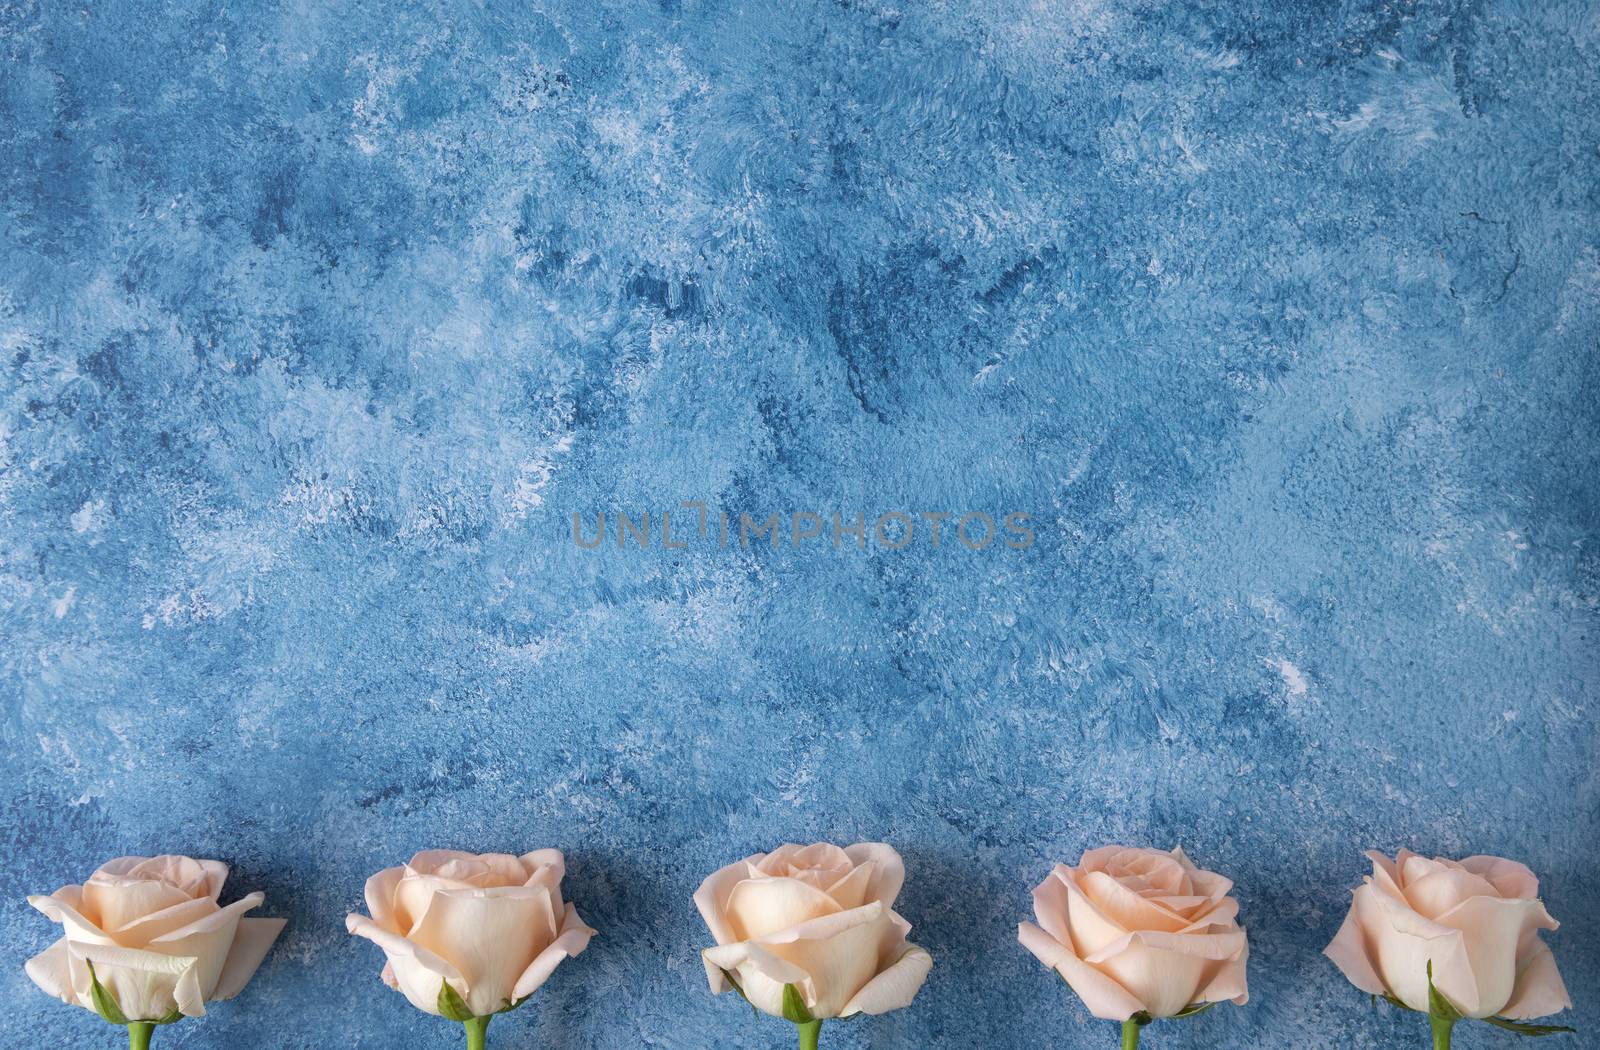 peach color roses on blue and white acrylic background by Nawoot